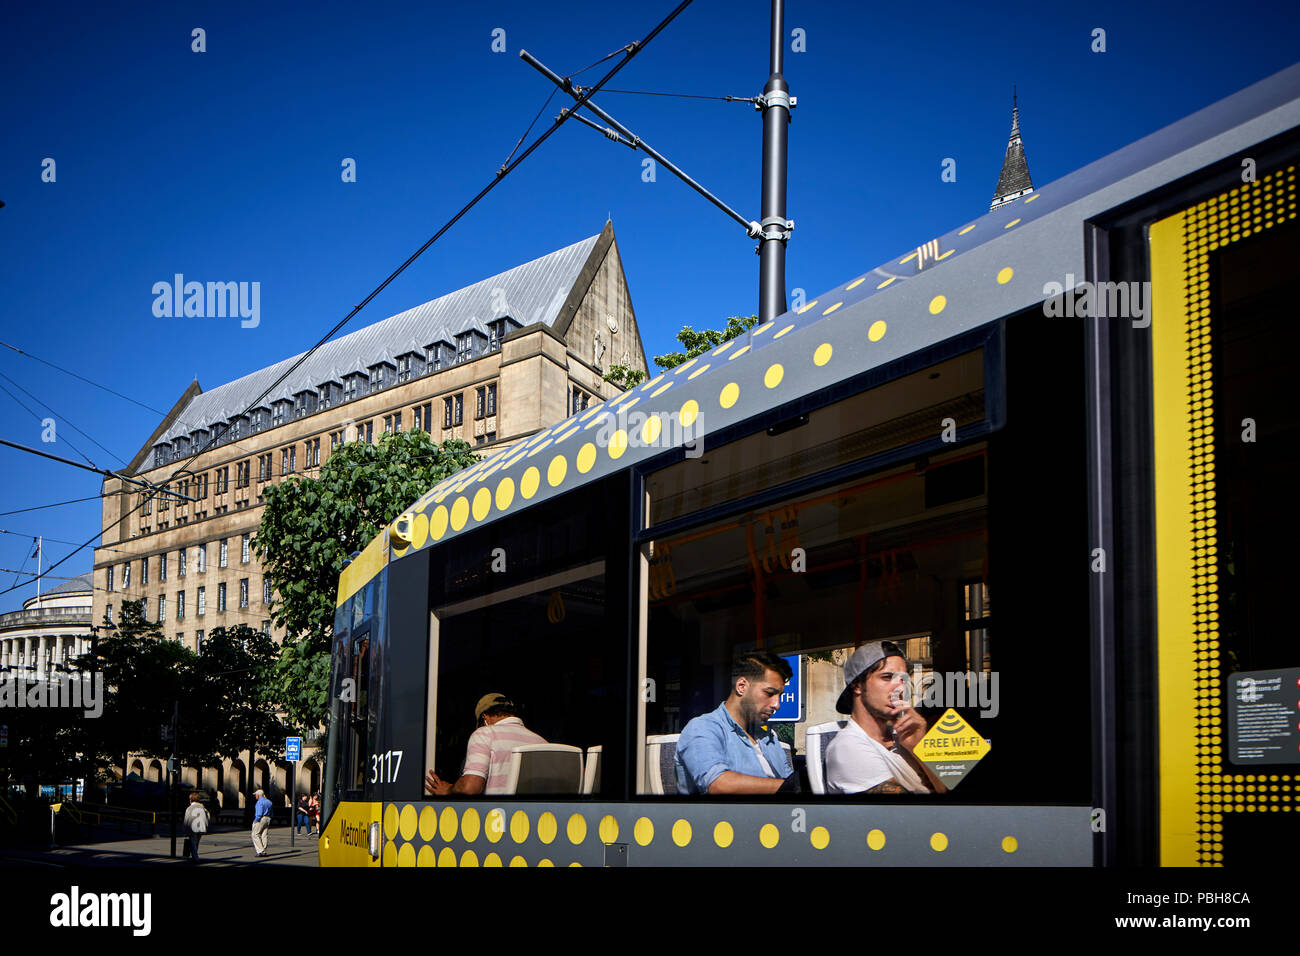 Metrolink tram at Peters Square, Town hall,   Manchester city centre Stock Photo